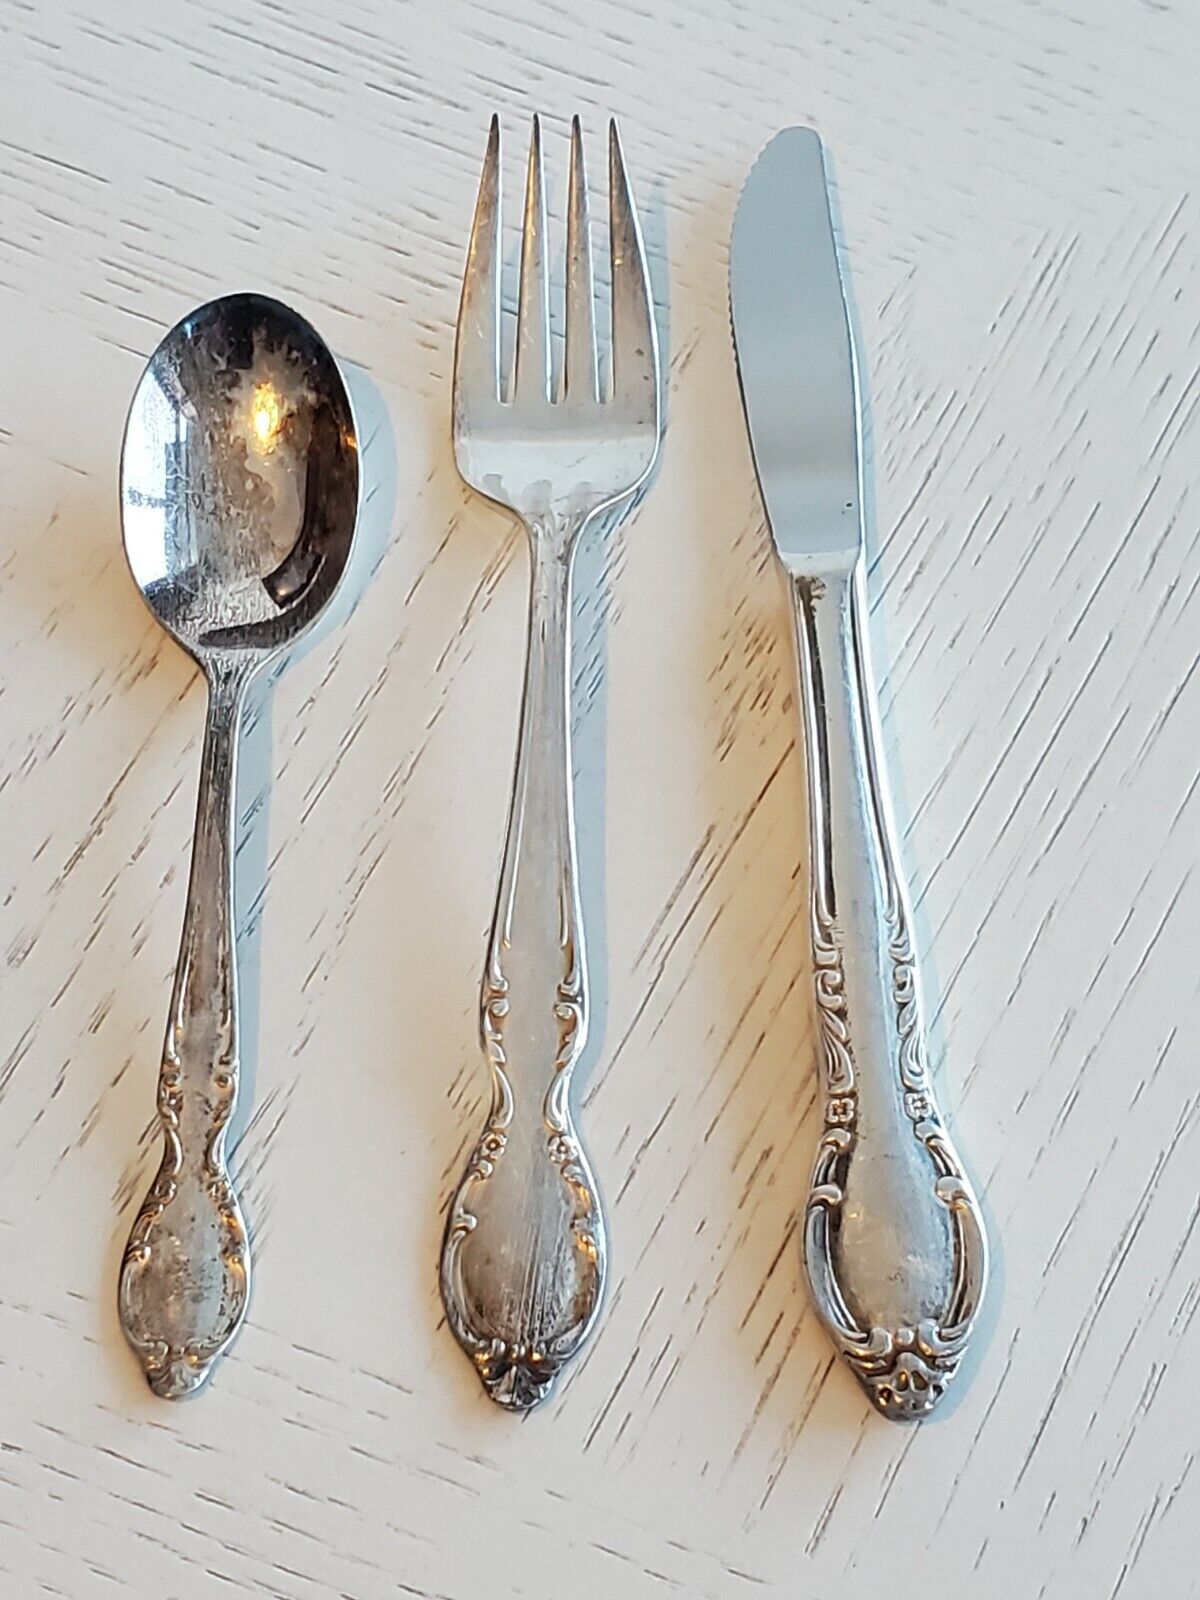 VTG Airline Flatware Cutlery Silverplate Set - Air Canada - WM Rogers & Son IS